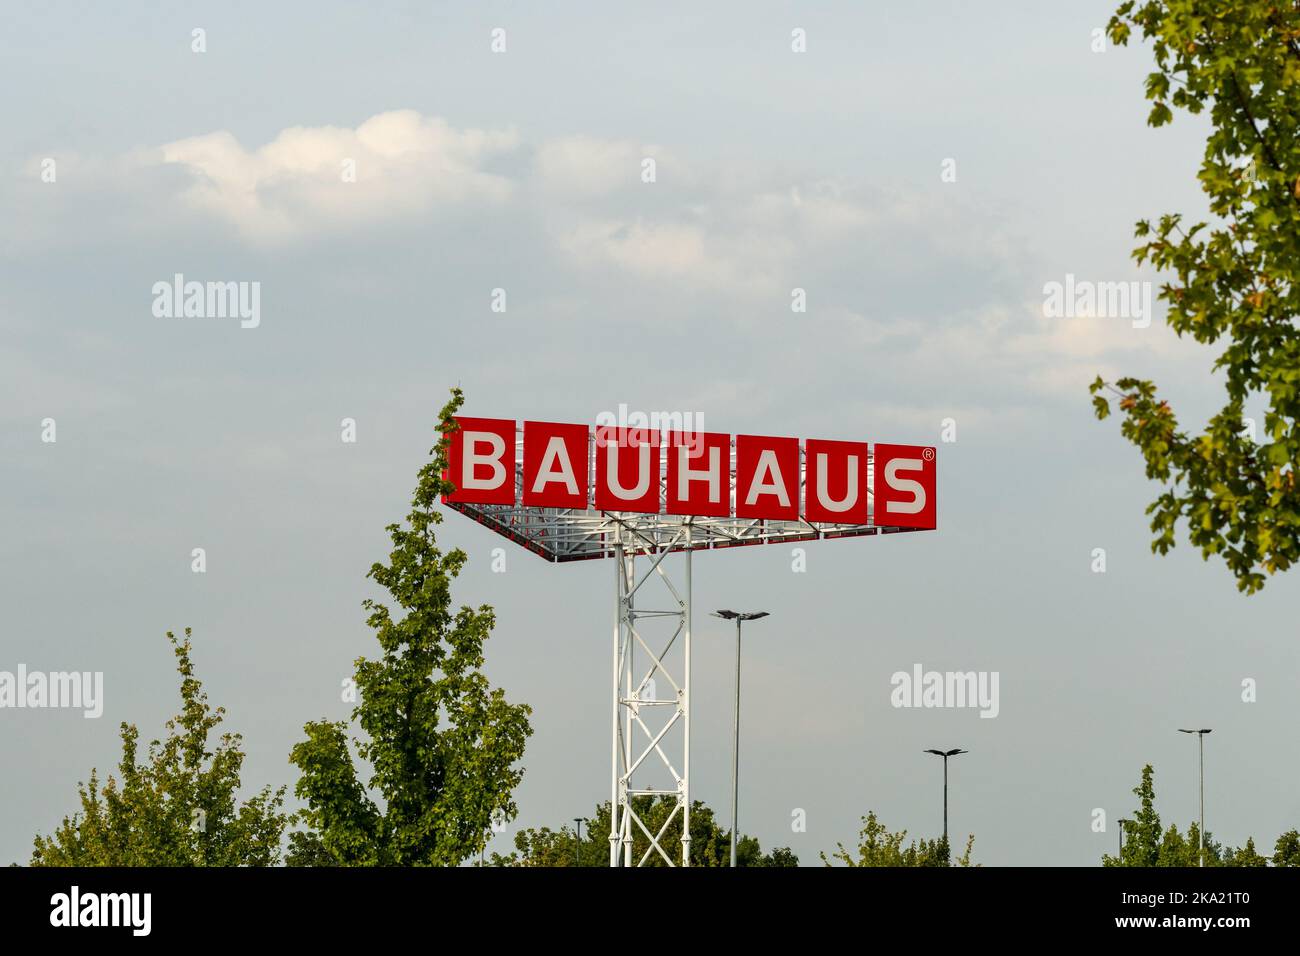 Bauhaus letters of the German hardware store high up in the sky. Advertising on a parking lot. Green trees are in front of the cloudy sky. Stock Photo